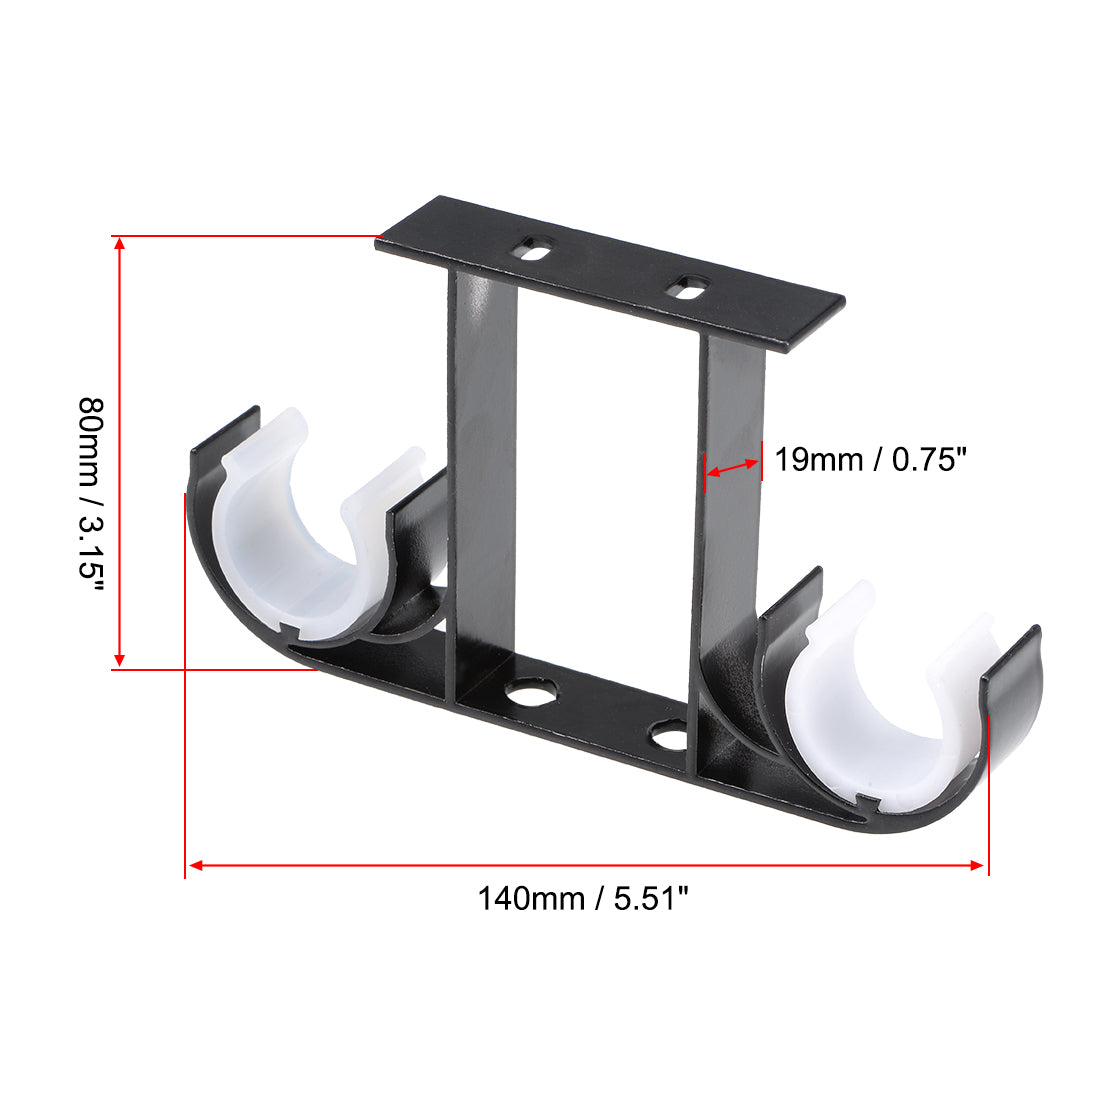 uxcell Uxcell Curtain Rod Bracket Aluminum Alloy Double Holder Support for 26mm - 29mm Drapery Rod, 140 x 80 x 19mm Black 2 Pcs